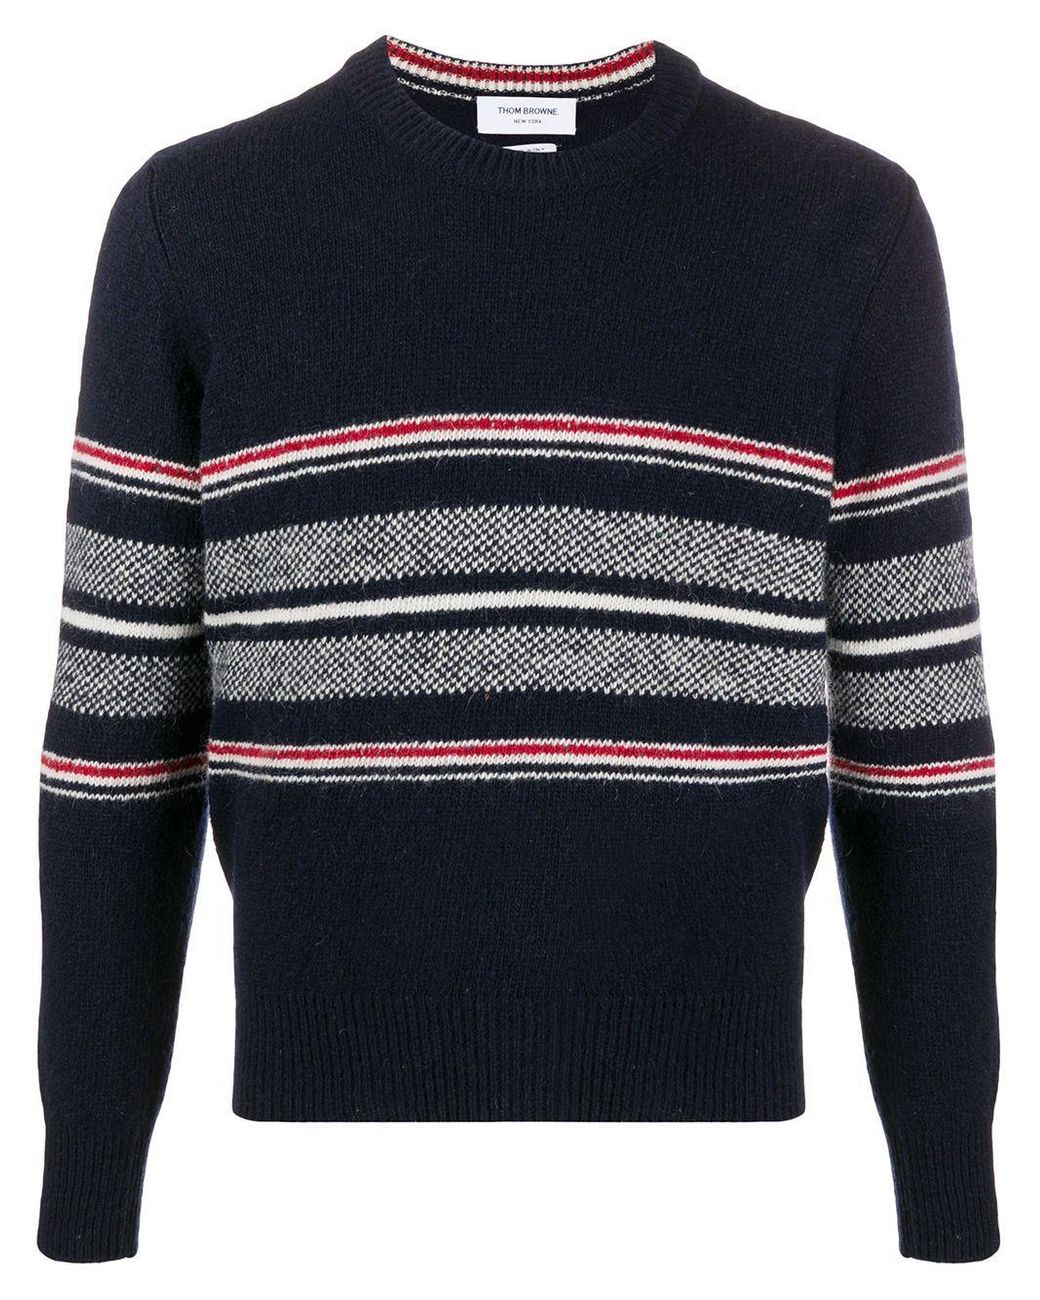 Thom Browne Wool Sweater in Blue for Men - Lyst